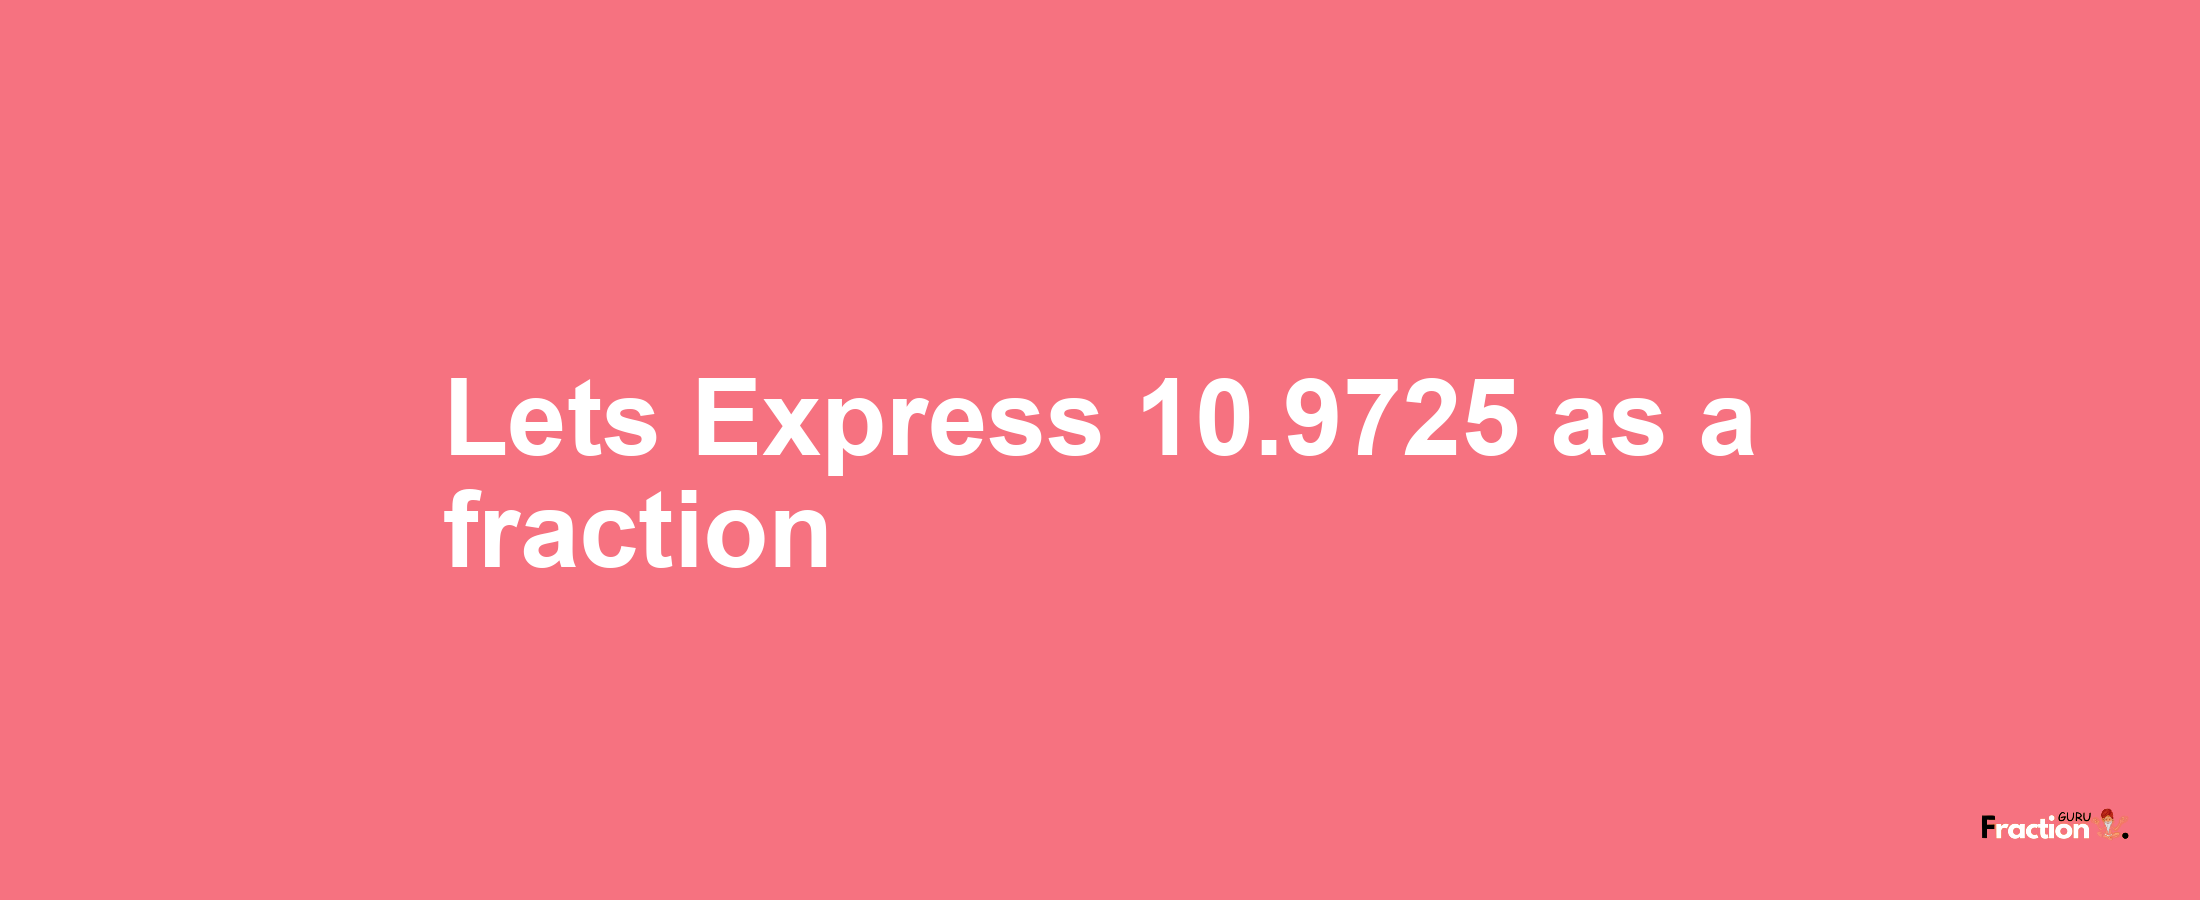 Lets Express 10.9725 as afraction